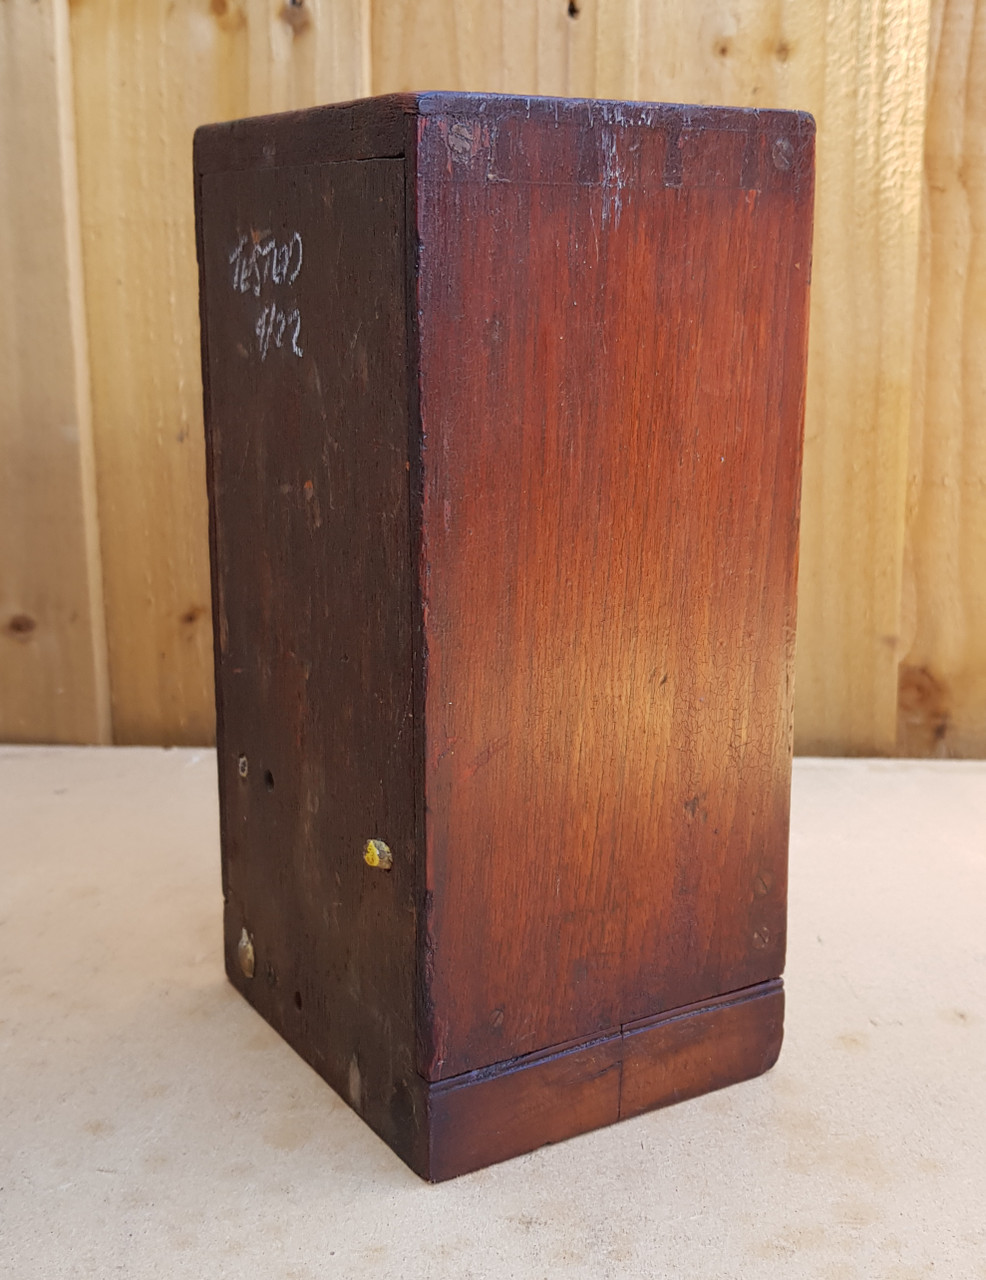 VT 5350. GREAT WESTERN RAILWAY WOOD CASED SIGNAL ARM REPEATER.